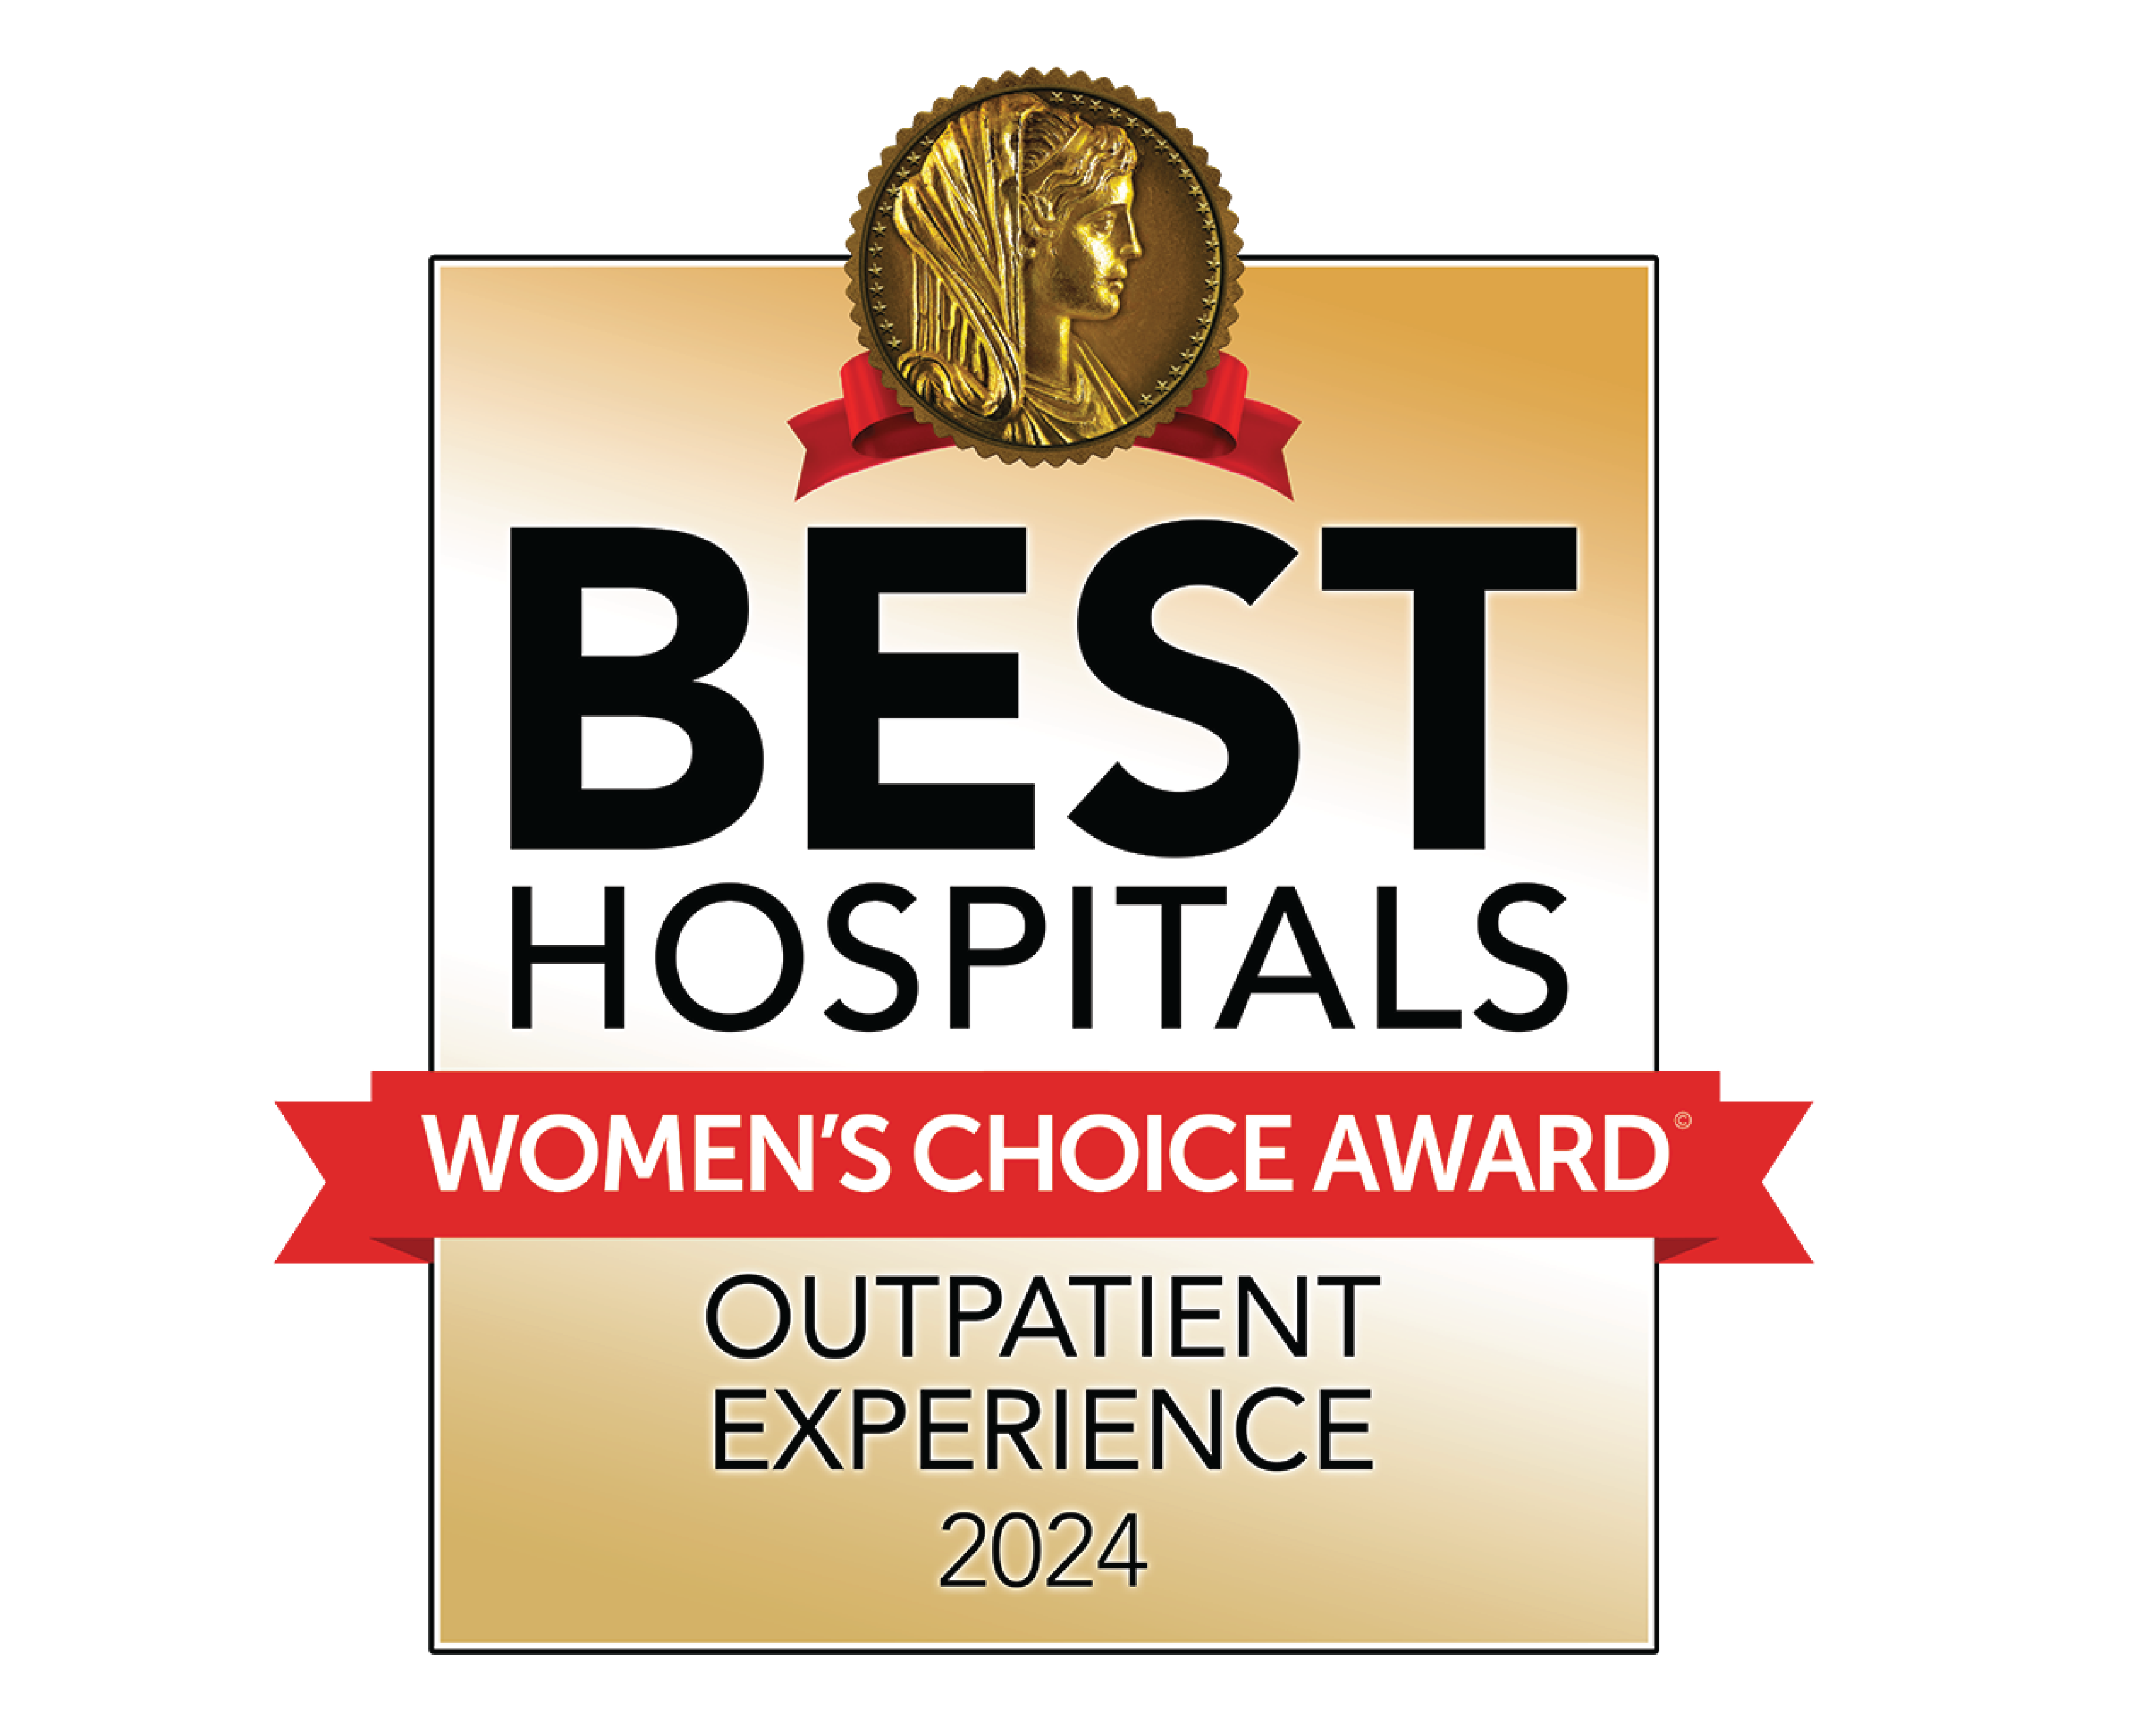 Newberry Hospital Receives the 2024 Women’s Choice Award® as one of America’s Best Hospitals for Outpatient Experience